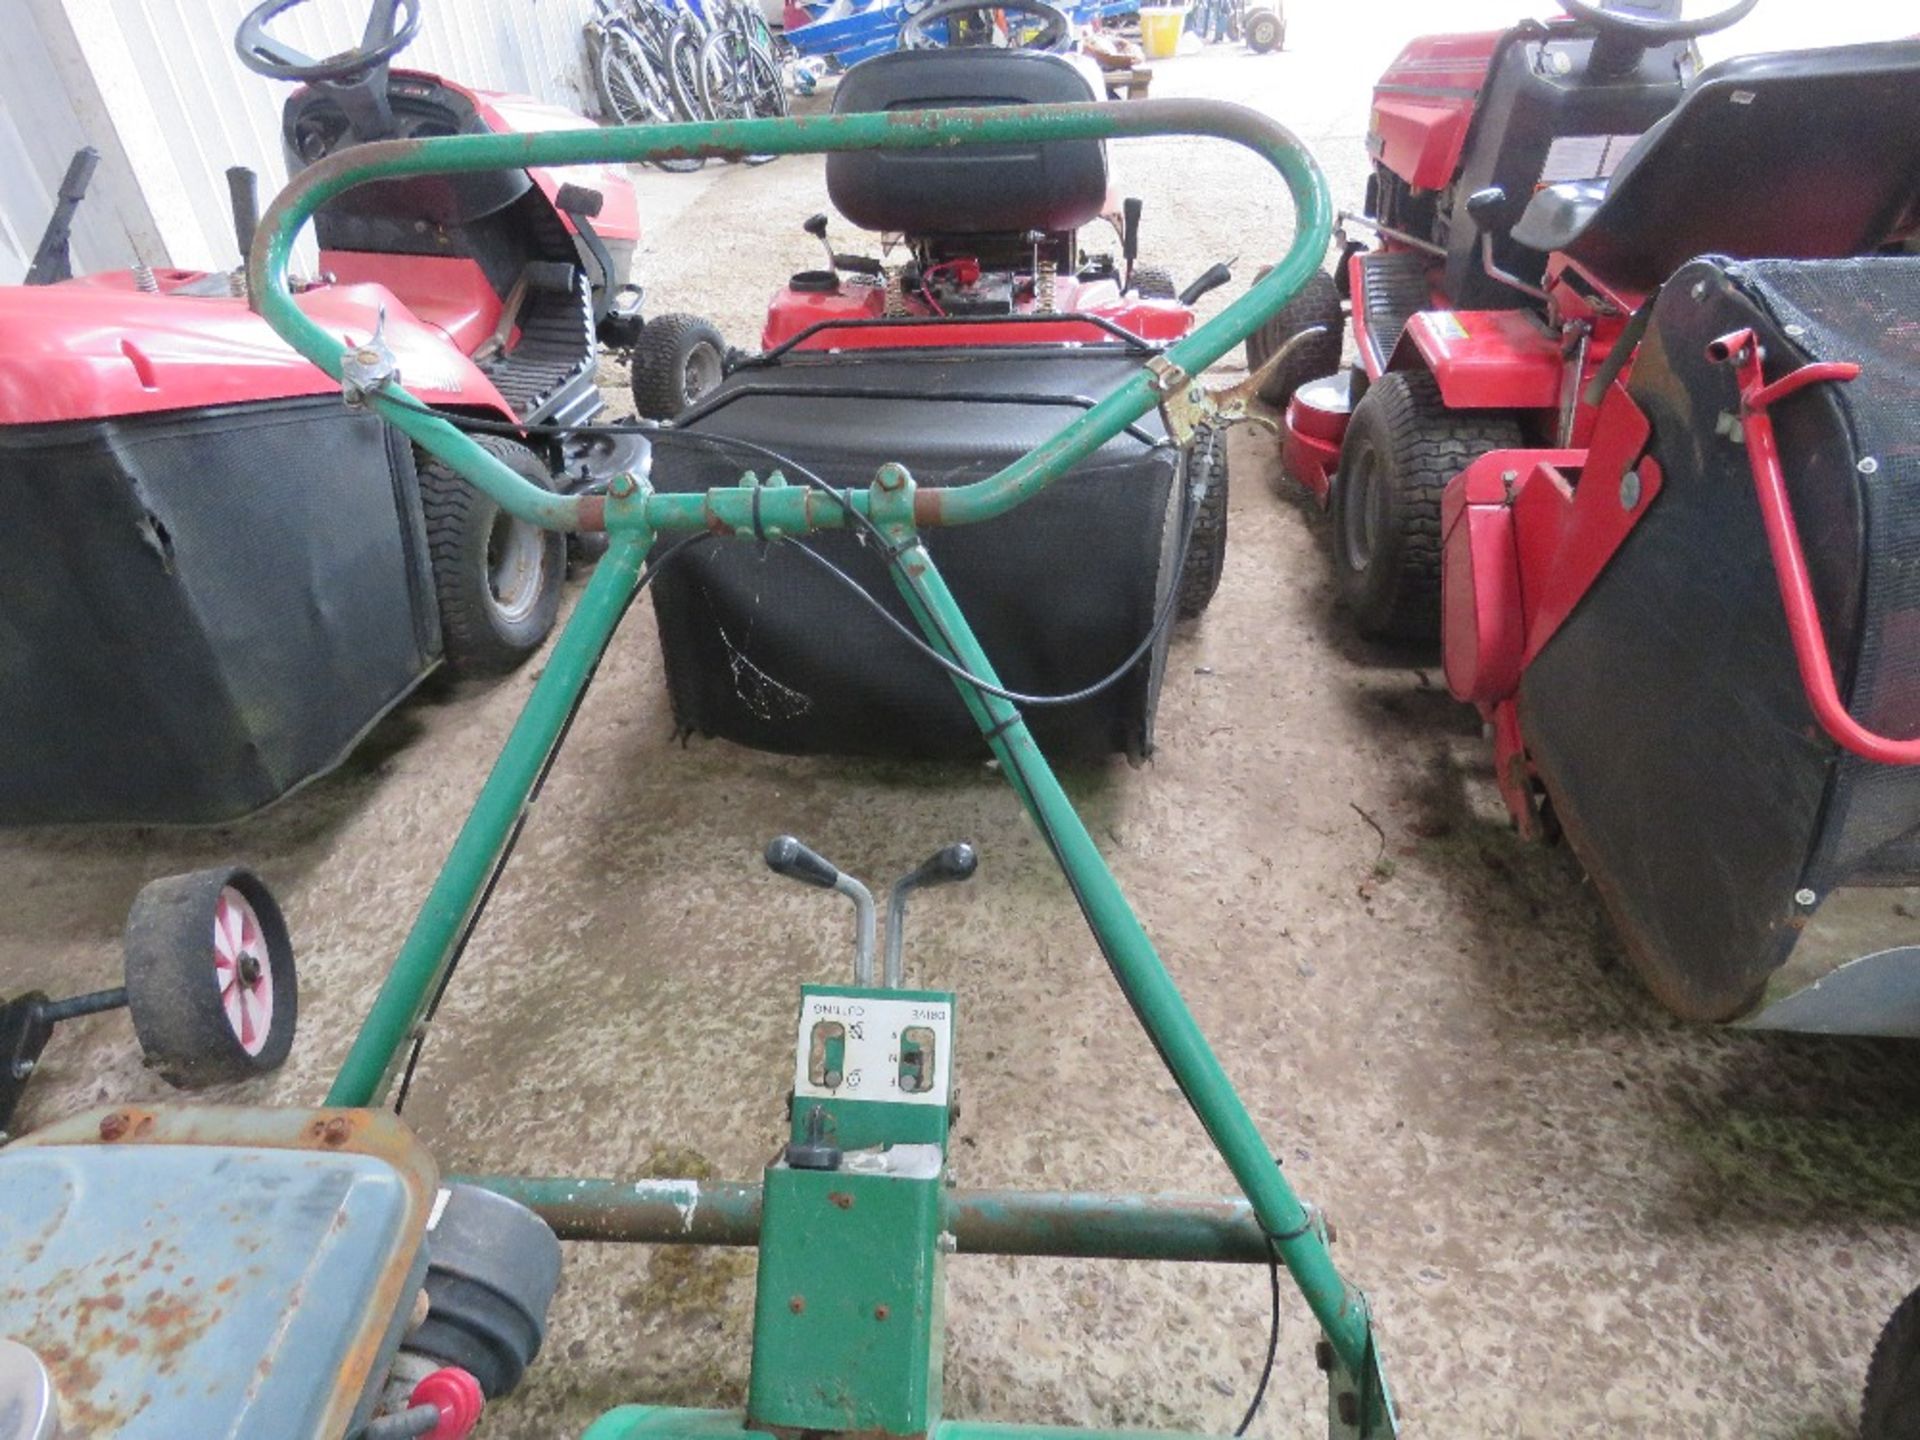 RANSOMES PROFESSIONAL CYLINDER MOWER WITH BOX. KUBOTA ELECTRIC START PETROL ENGINE DIRECT FROM SPORT - Image 3 of 8